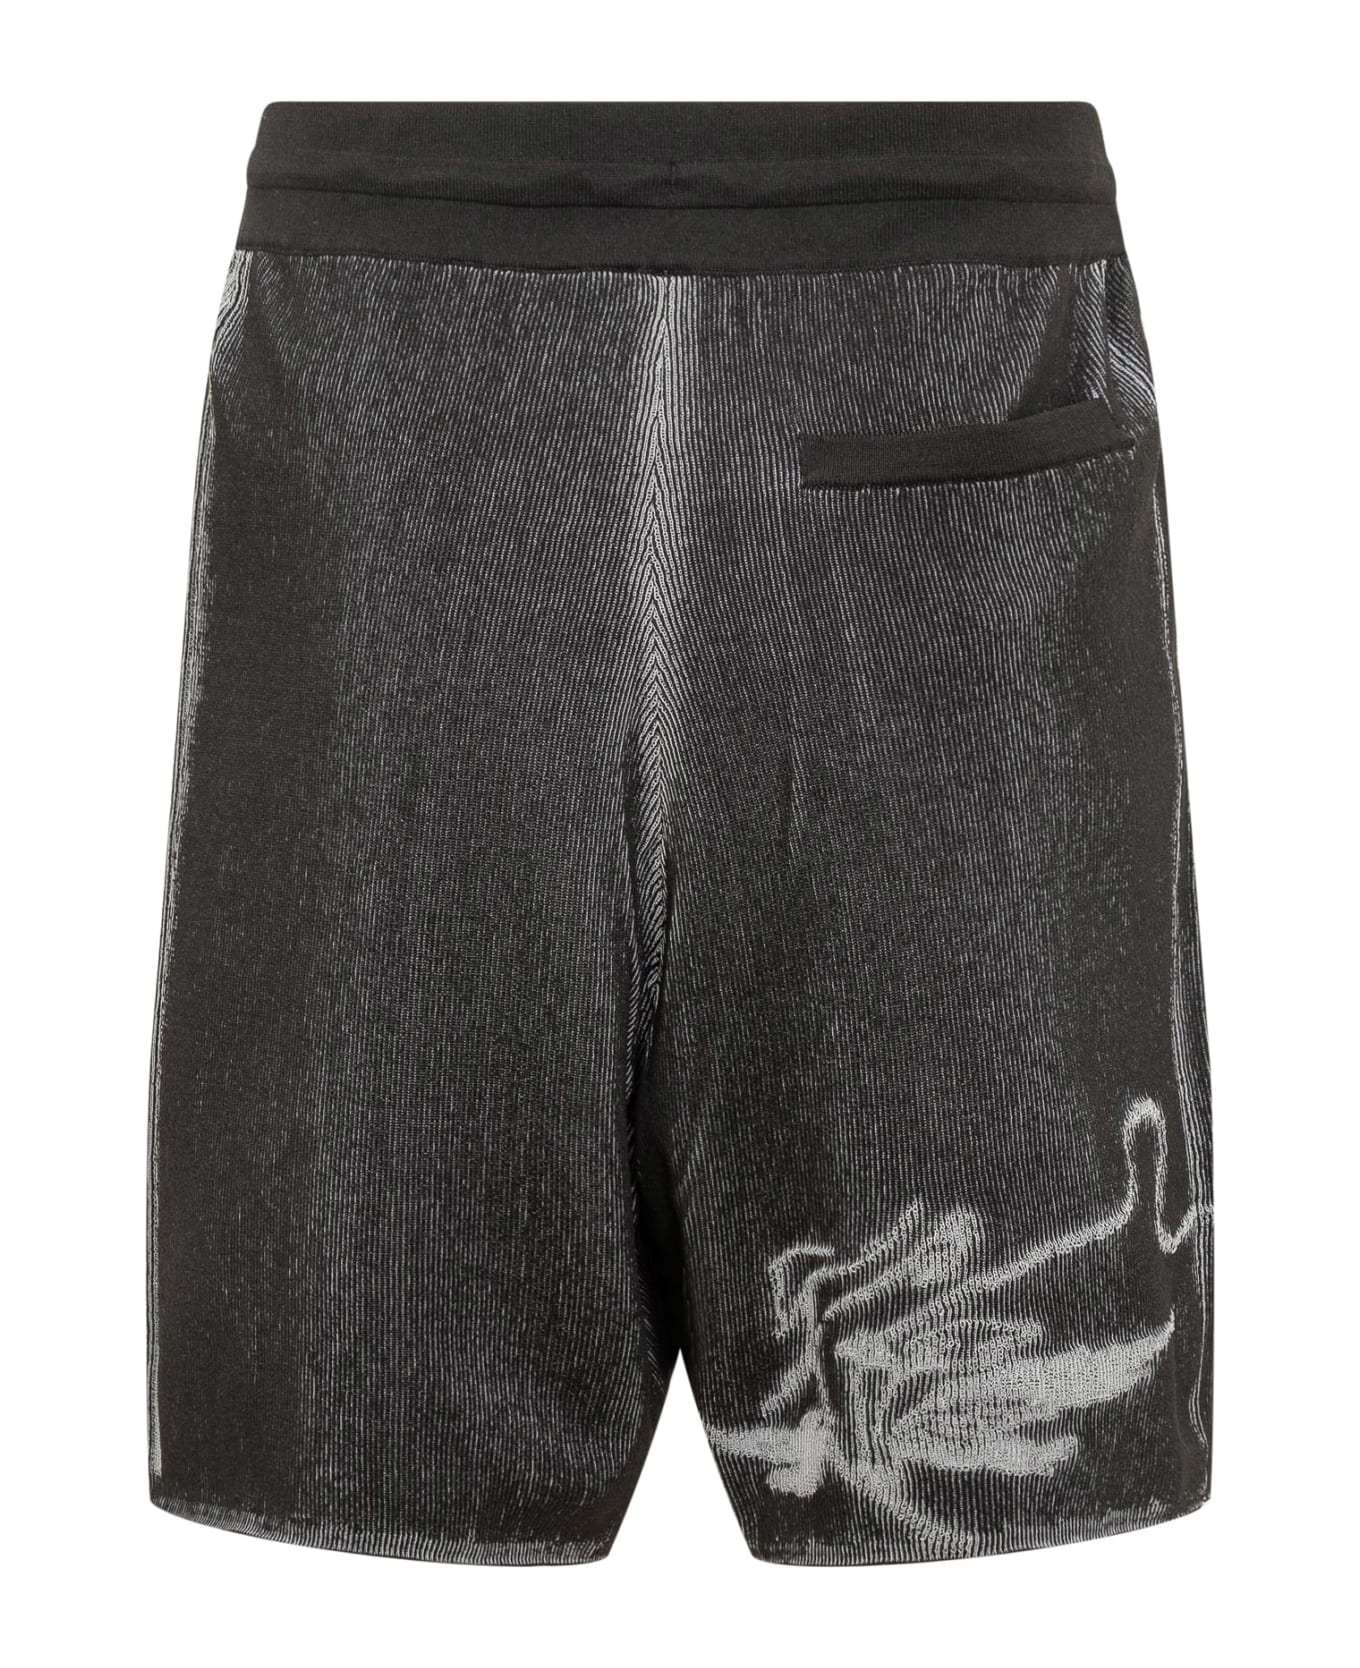 Y-3 Gfx Relaxed Fit Knit Shorts - BLACK/WHITE name:468